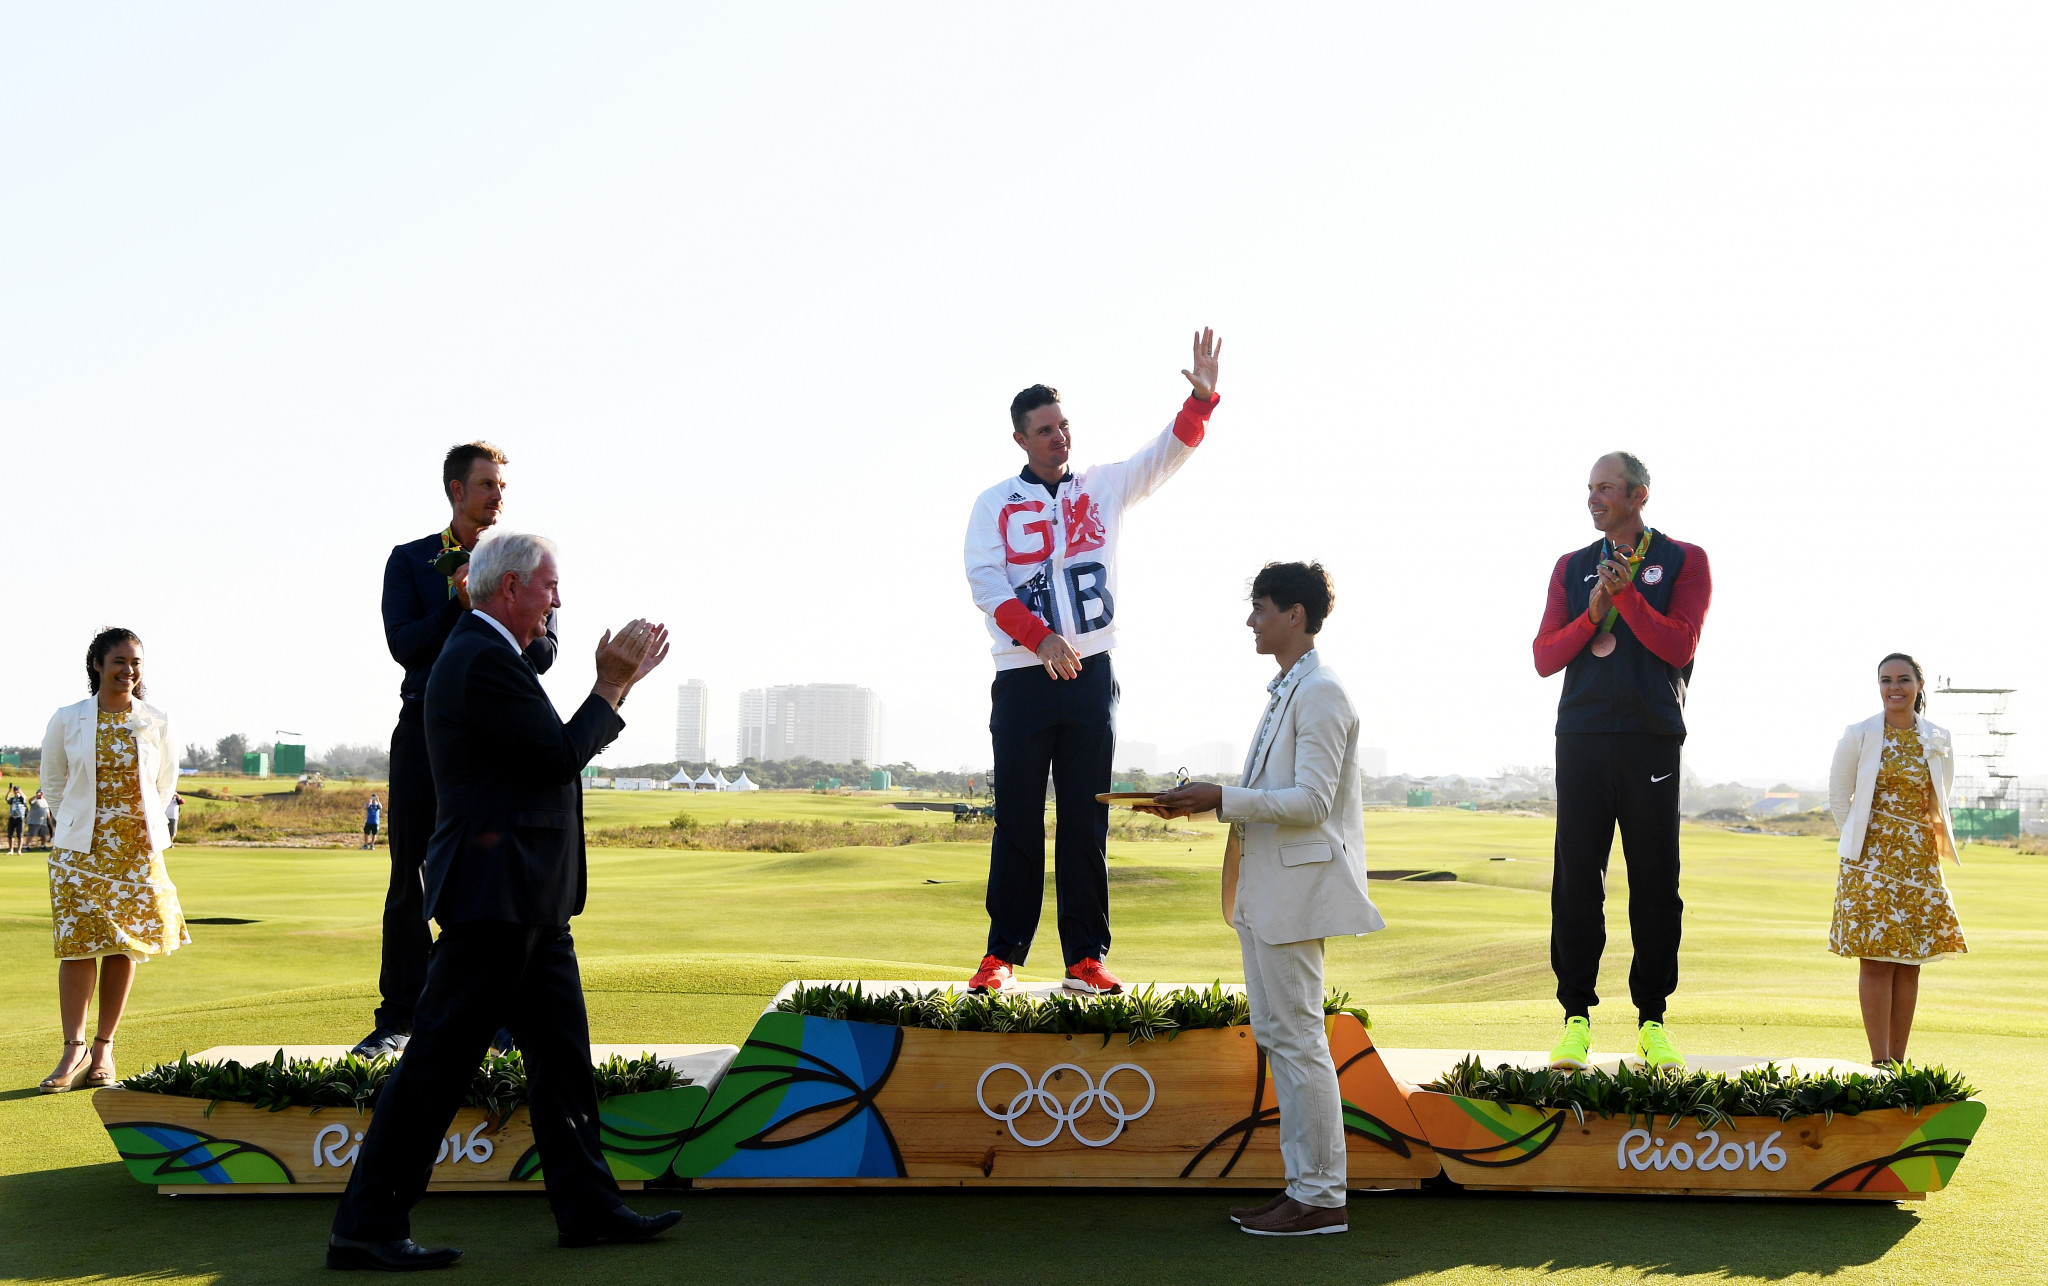 Golf returned to the Olympic Games at Rio 2016 after a 112-year hiatus, with Justin Rose winning the men's gold medal ©Getty Images